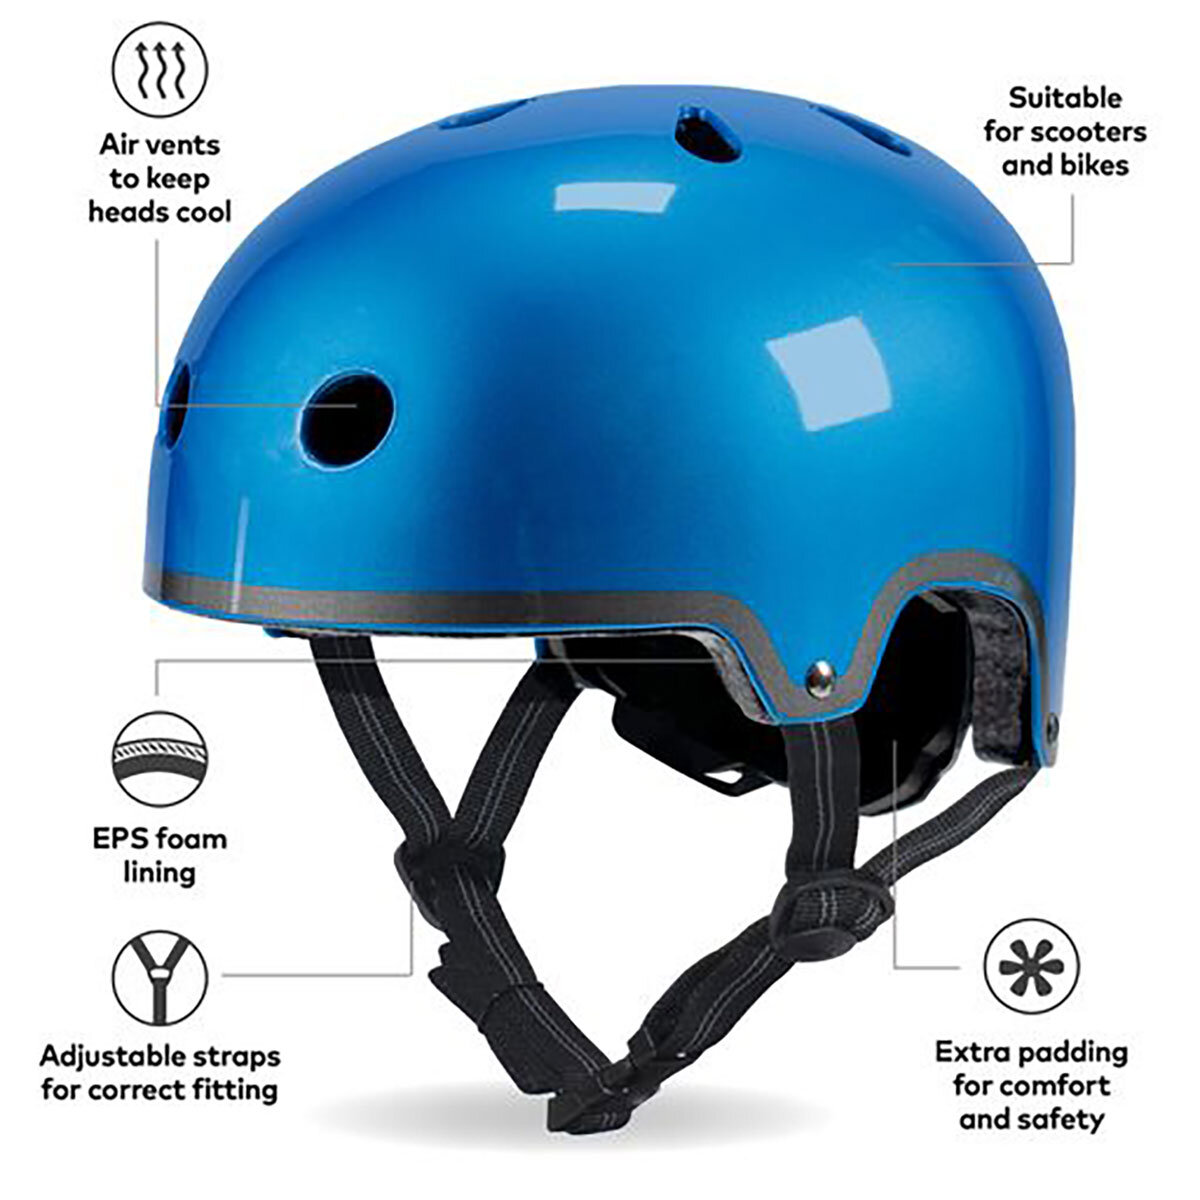 Maxi Micro Deluxe LED classic helmet & Sealife lunchbag Feature Image at costco.co.uk